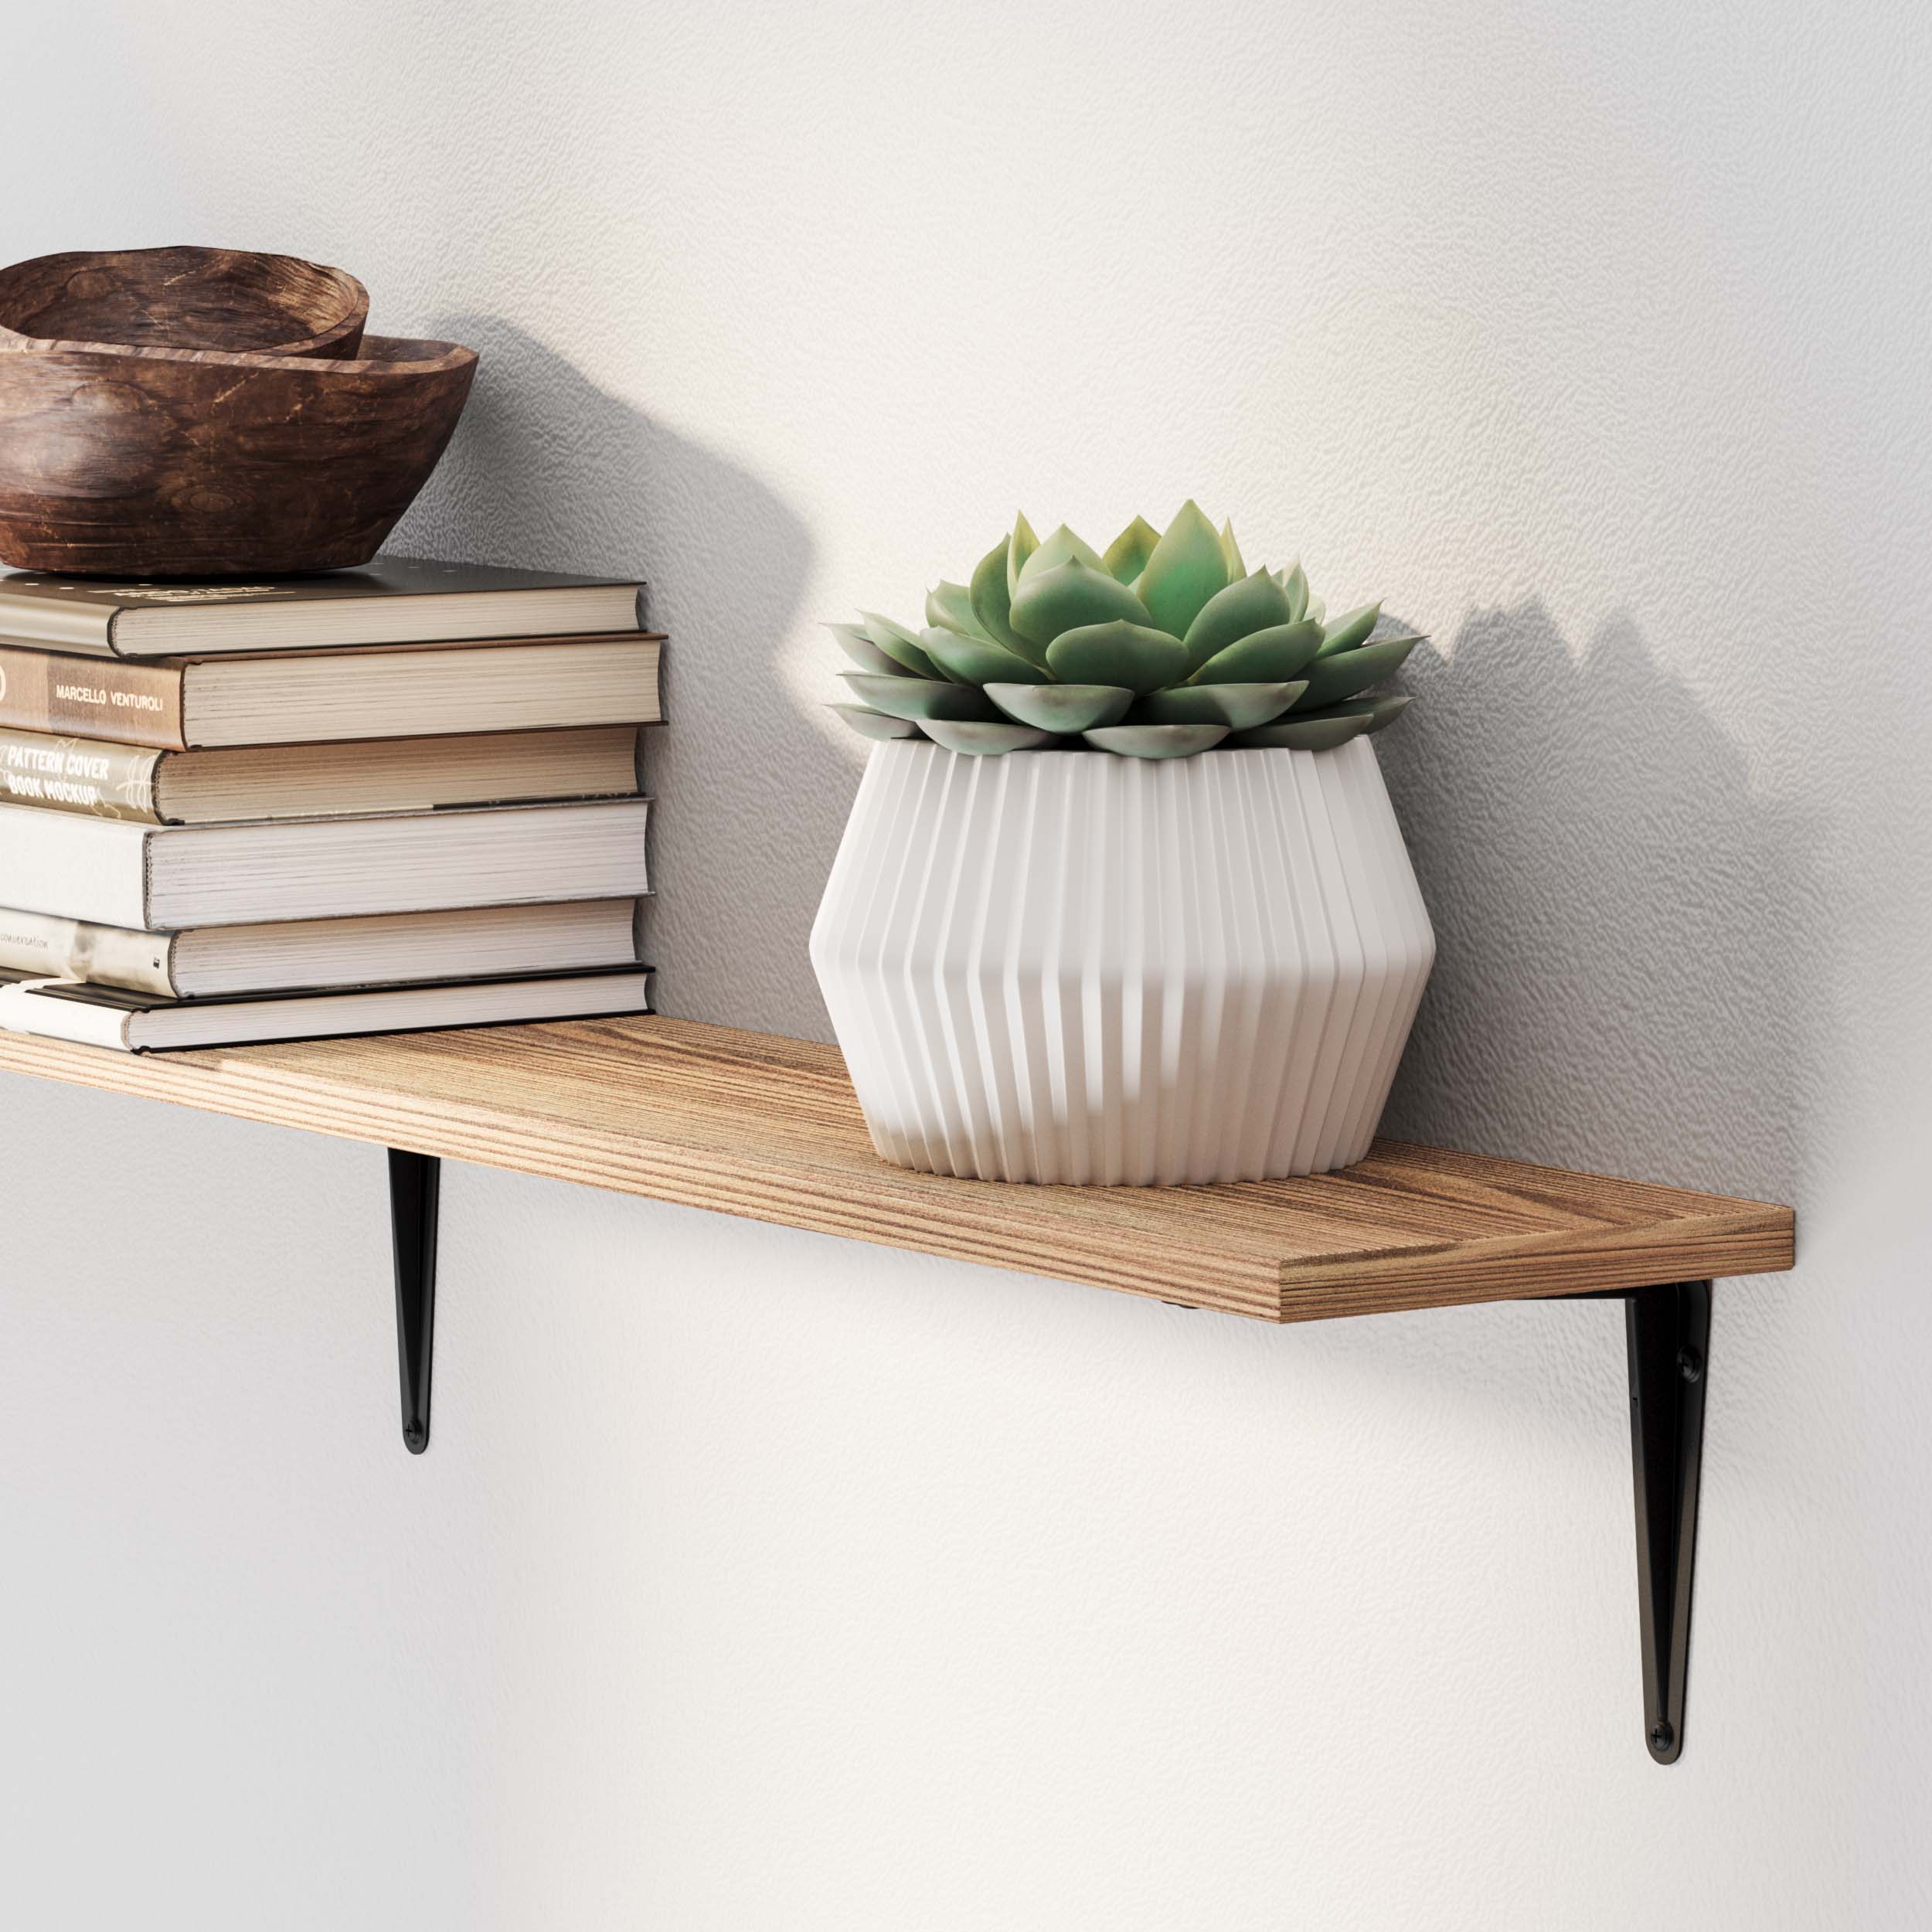 Floating shelf with a stack of books and a succulent in a decorative pot, creating a cozy corner.